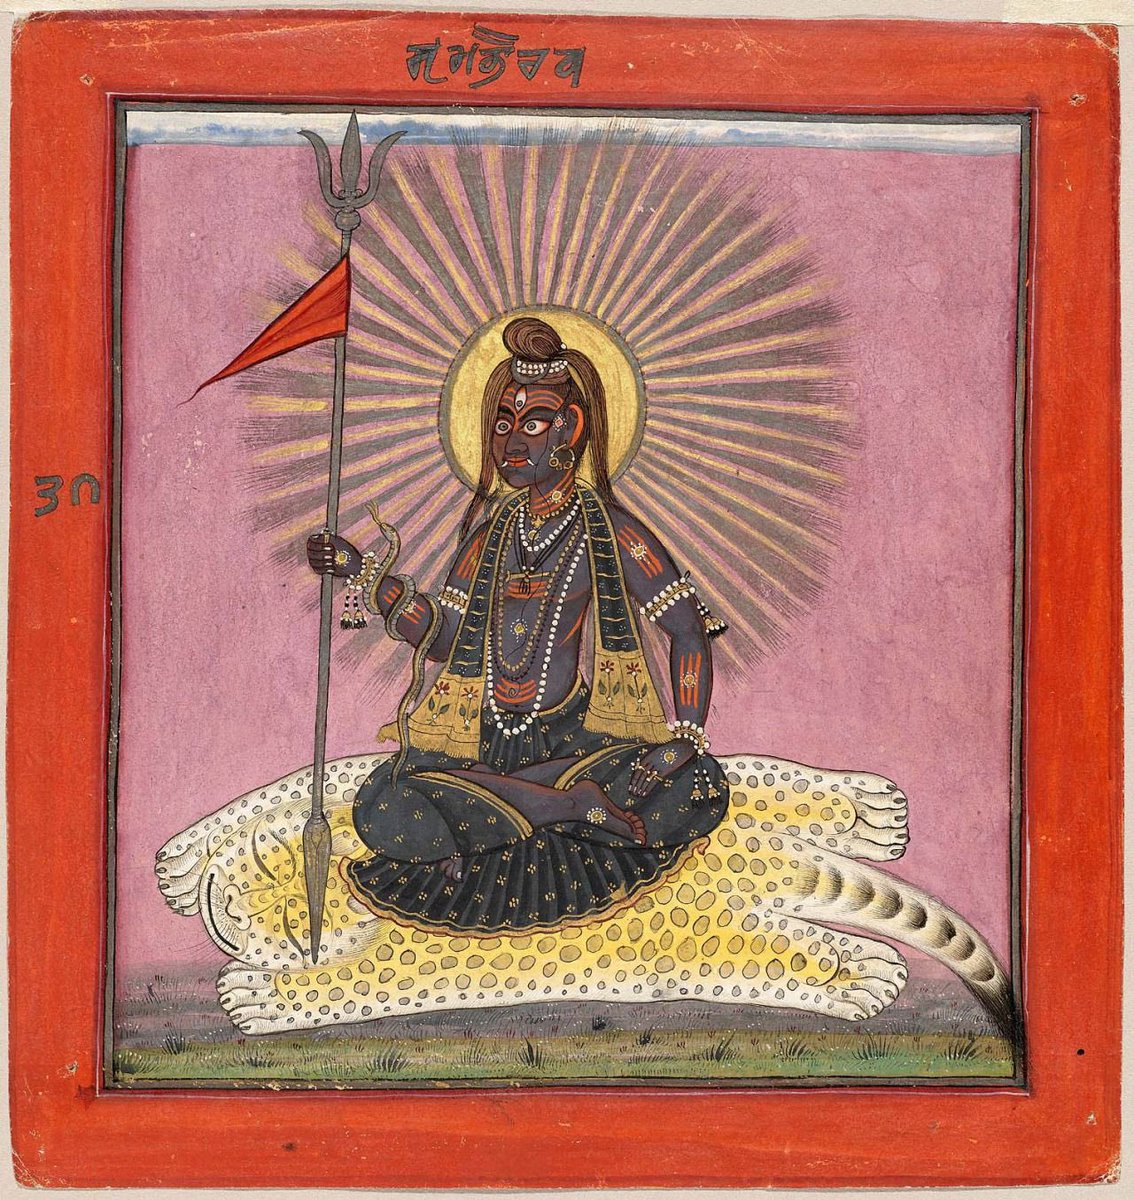 When I was a kid an excellent Kālī sadhak told me as time goes on Kālī’s upasana will keep on increasing along with 1 other devata more than any other. Bhairav who’s being worshipped now in volume goes hand in hand with her worship, as the tantrik texts say śaktas will increase.